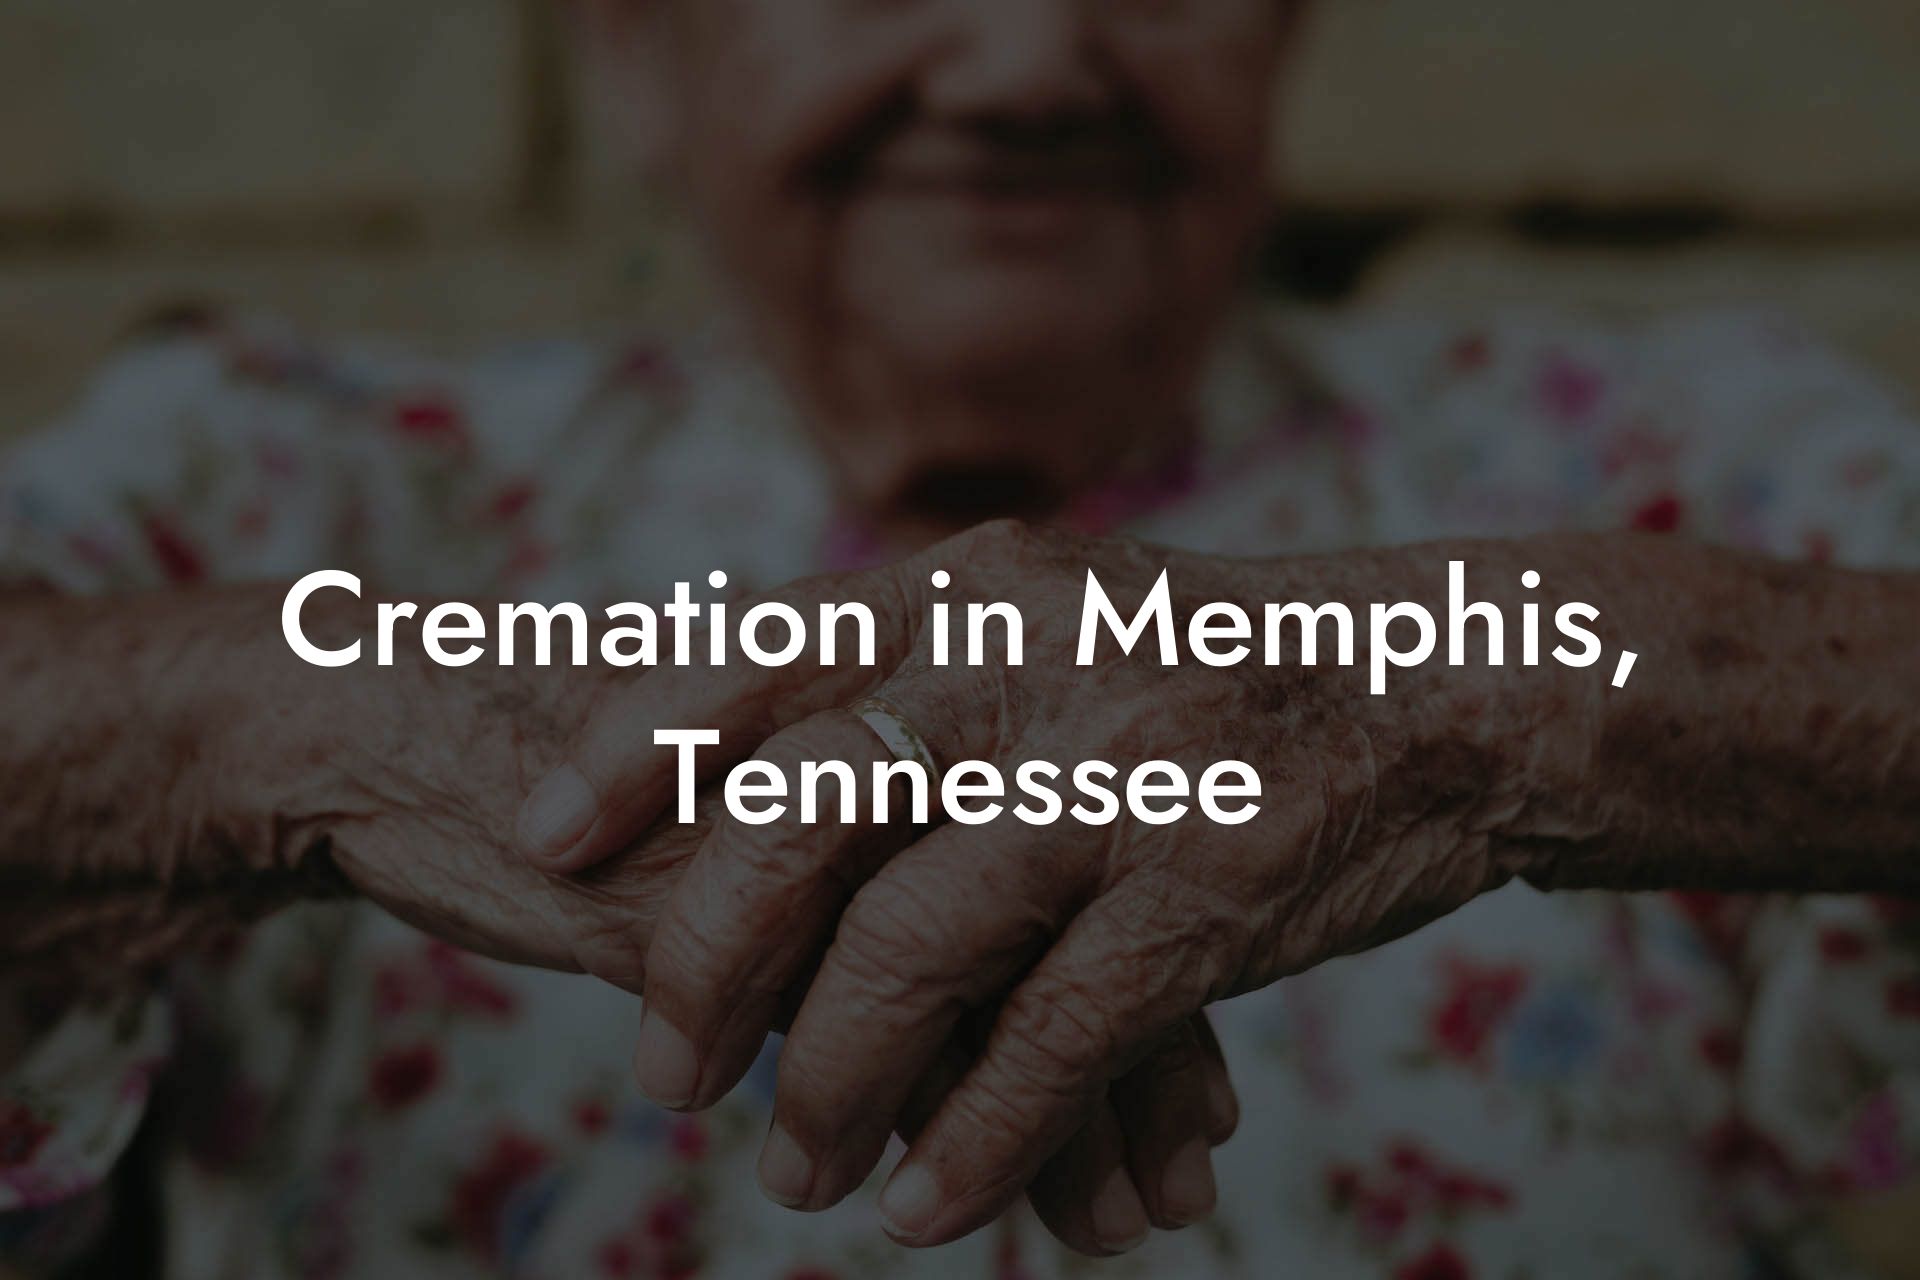 Cremation in Memphis, Tennessee